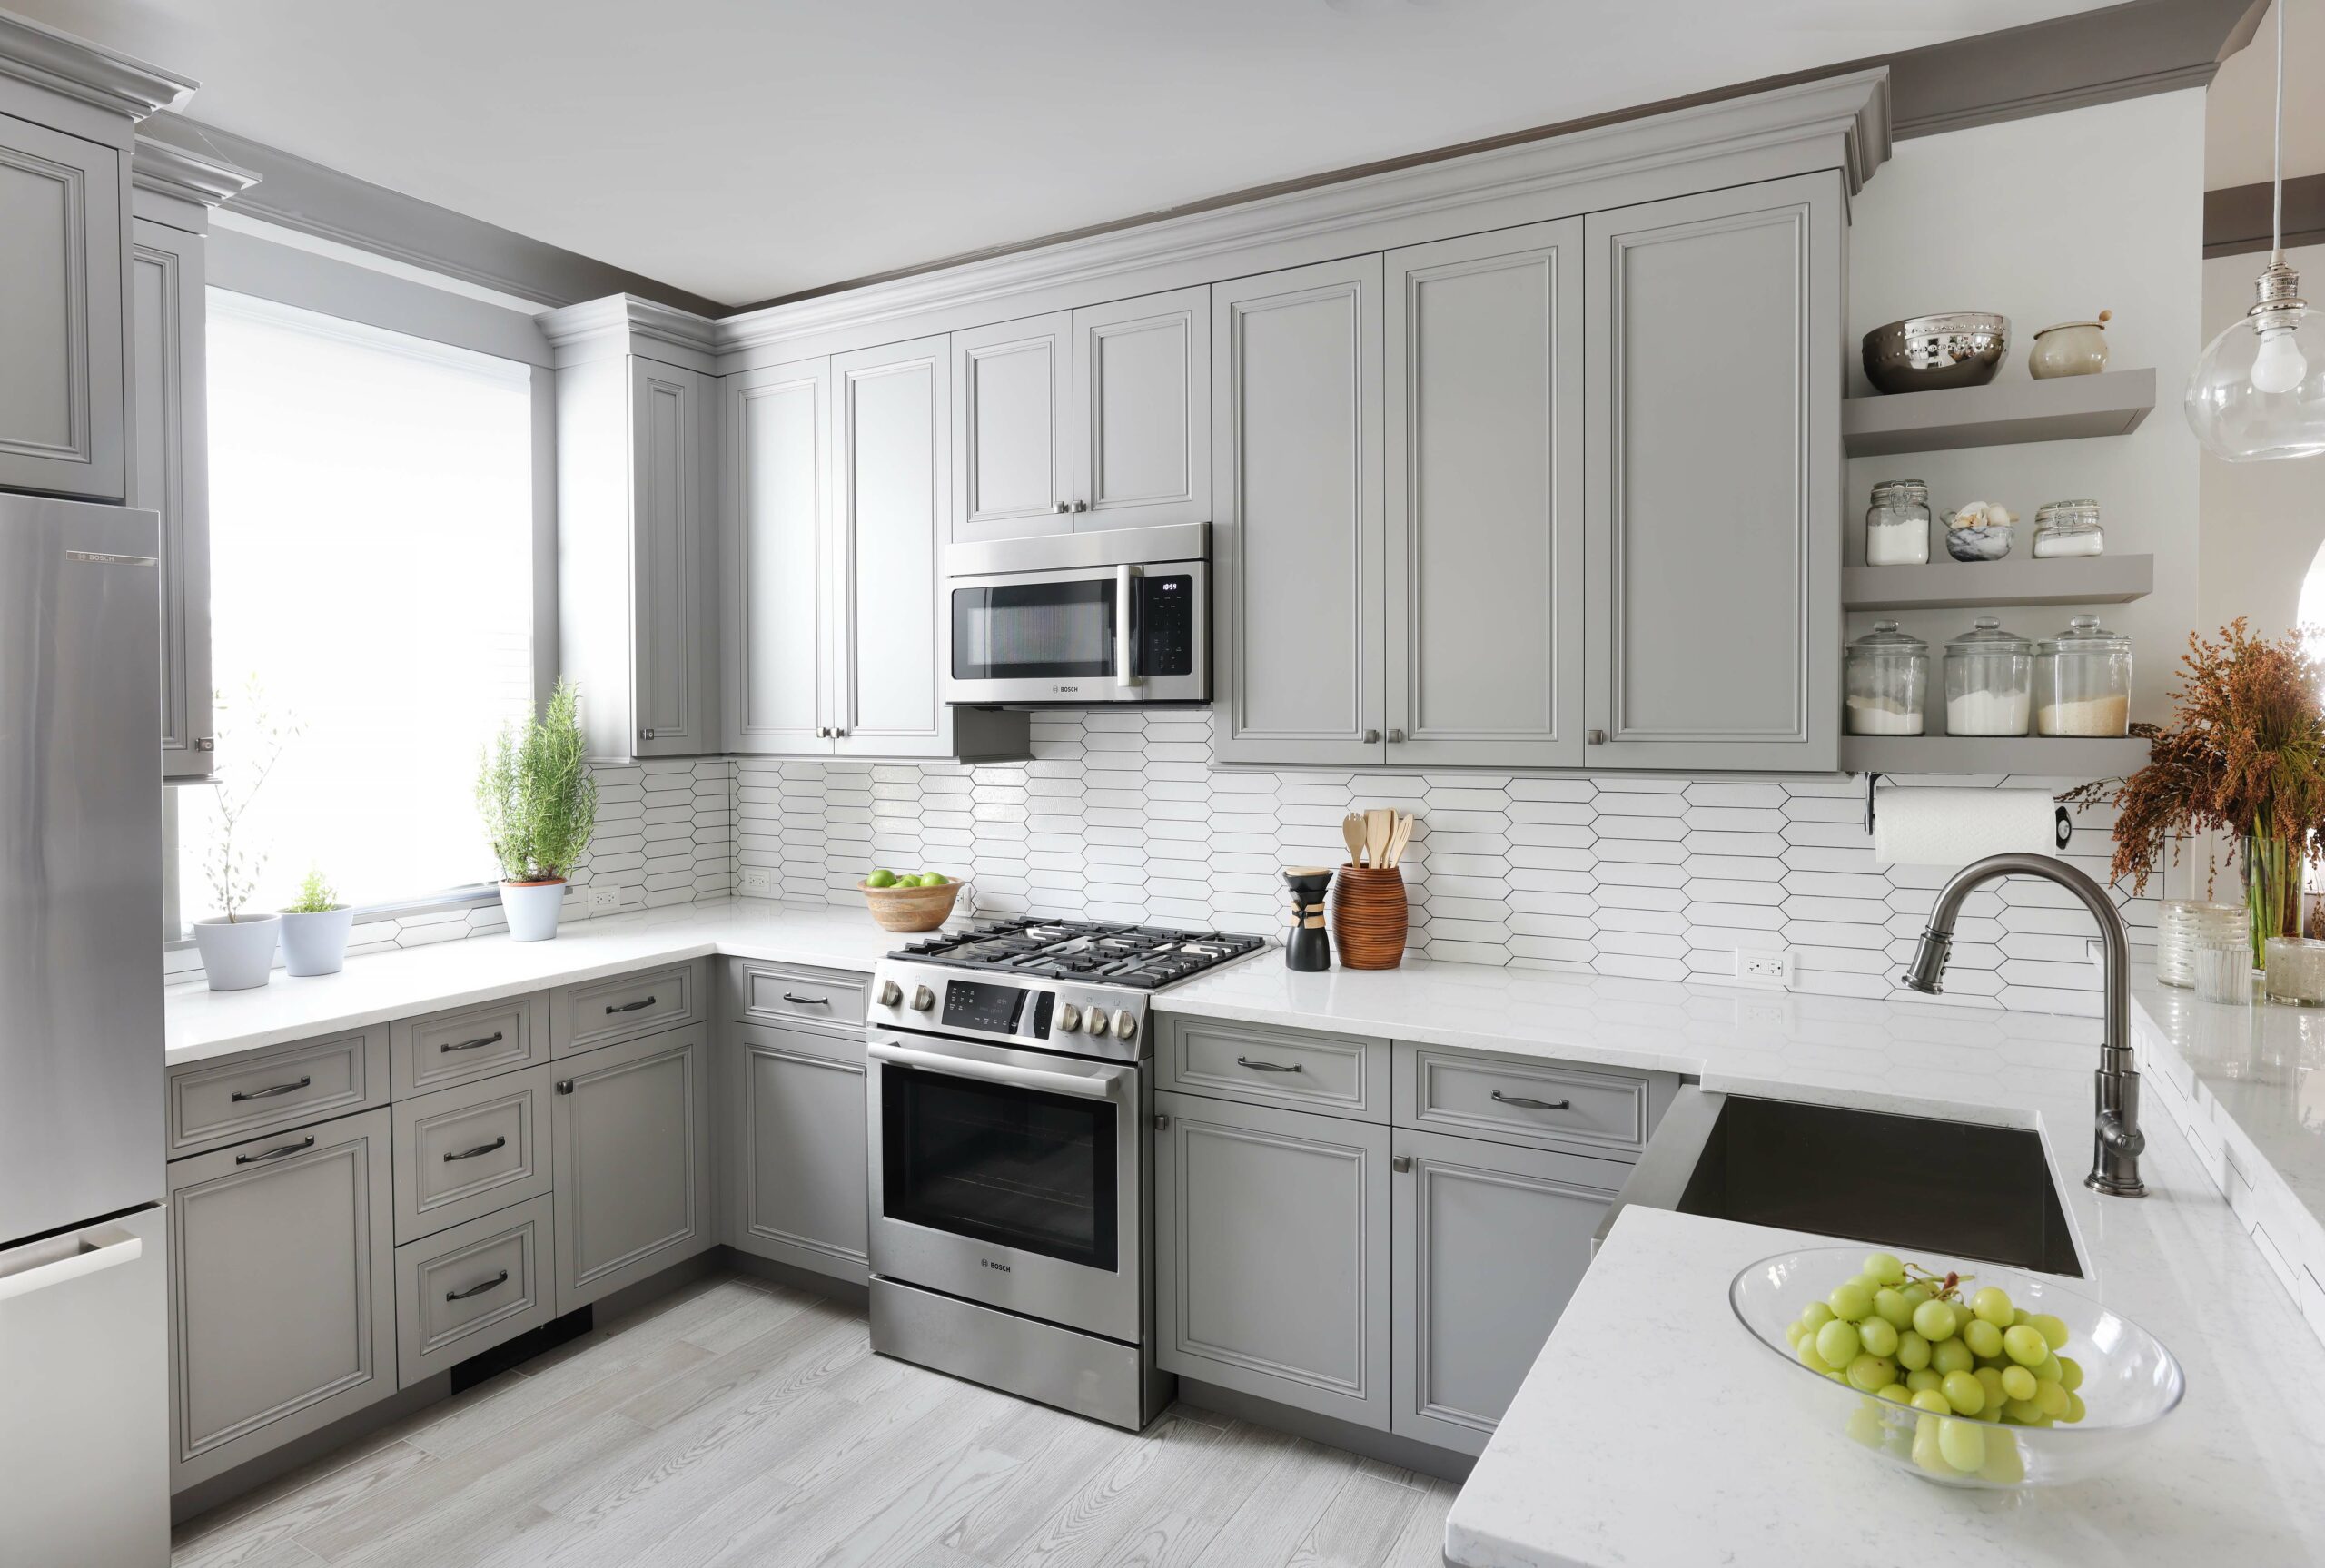 gray painted maple cabinets and open shelves in kitchen with white geometric backsplash